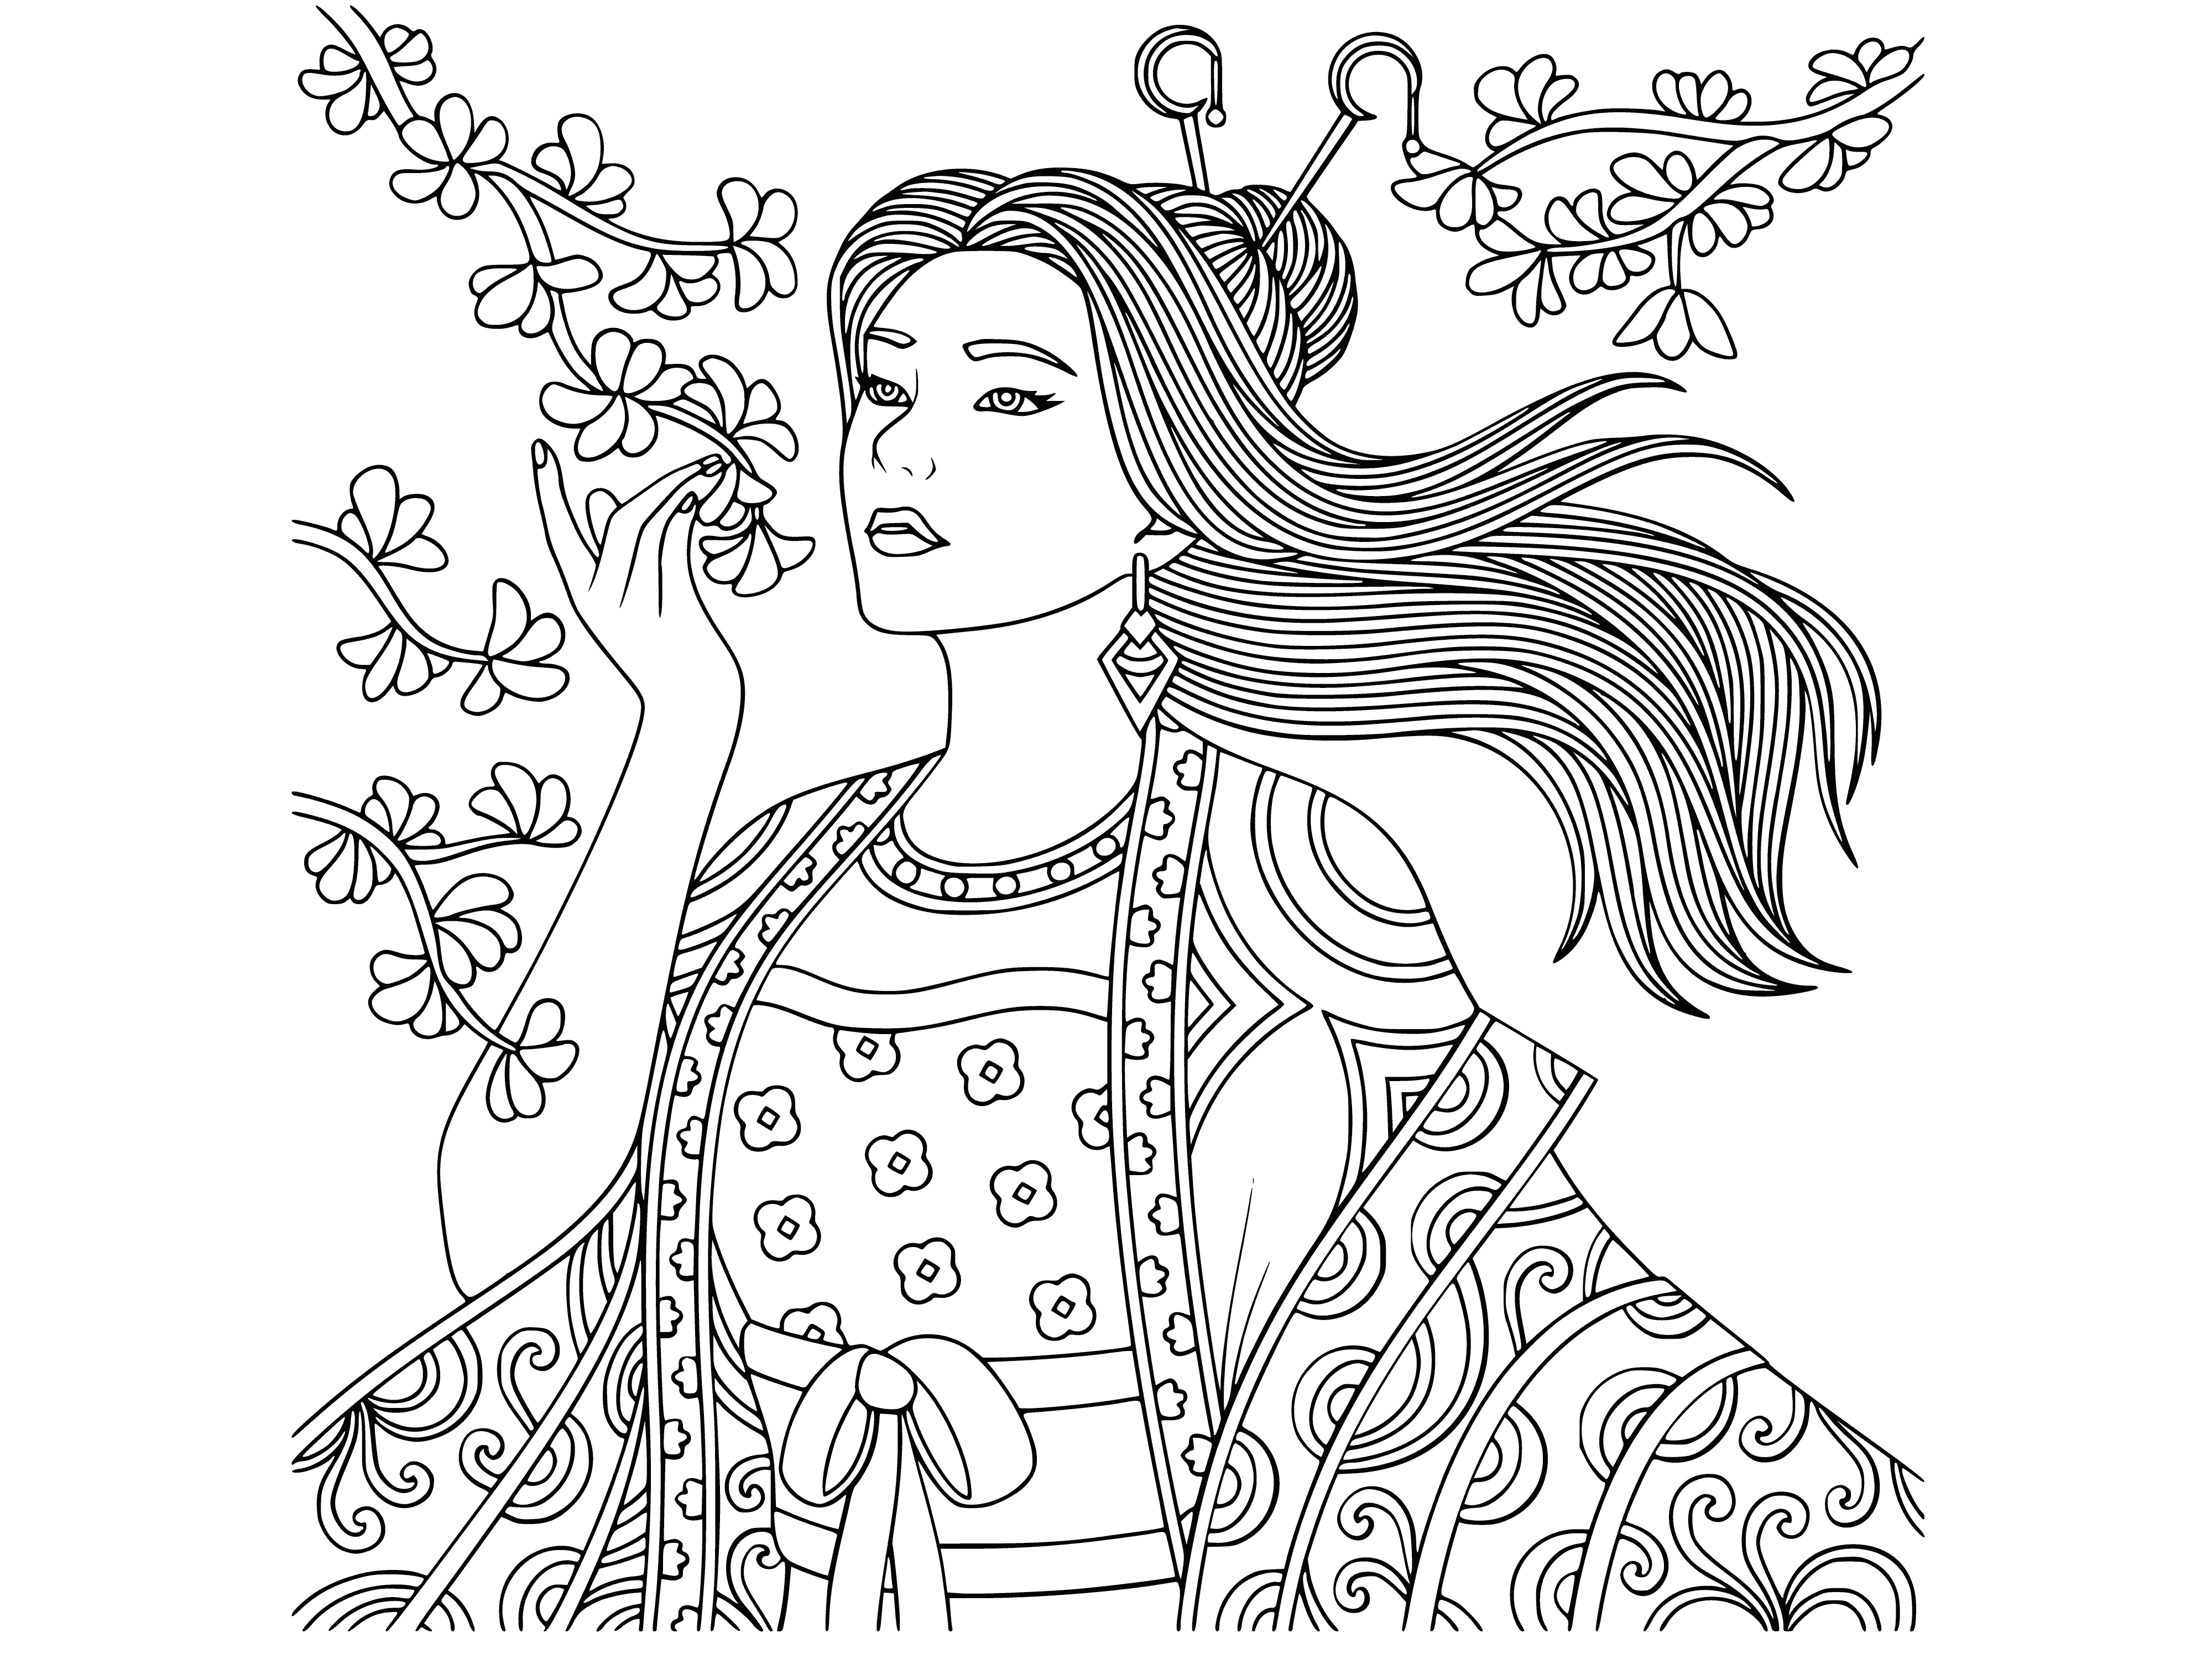 coloring page: 2 girls with dark hair in a coloring page, one standing, one sitting, eyes closed surrounded by flowers.